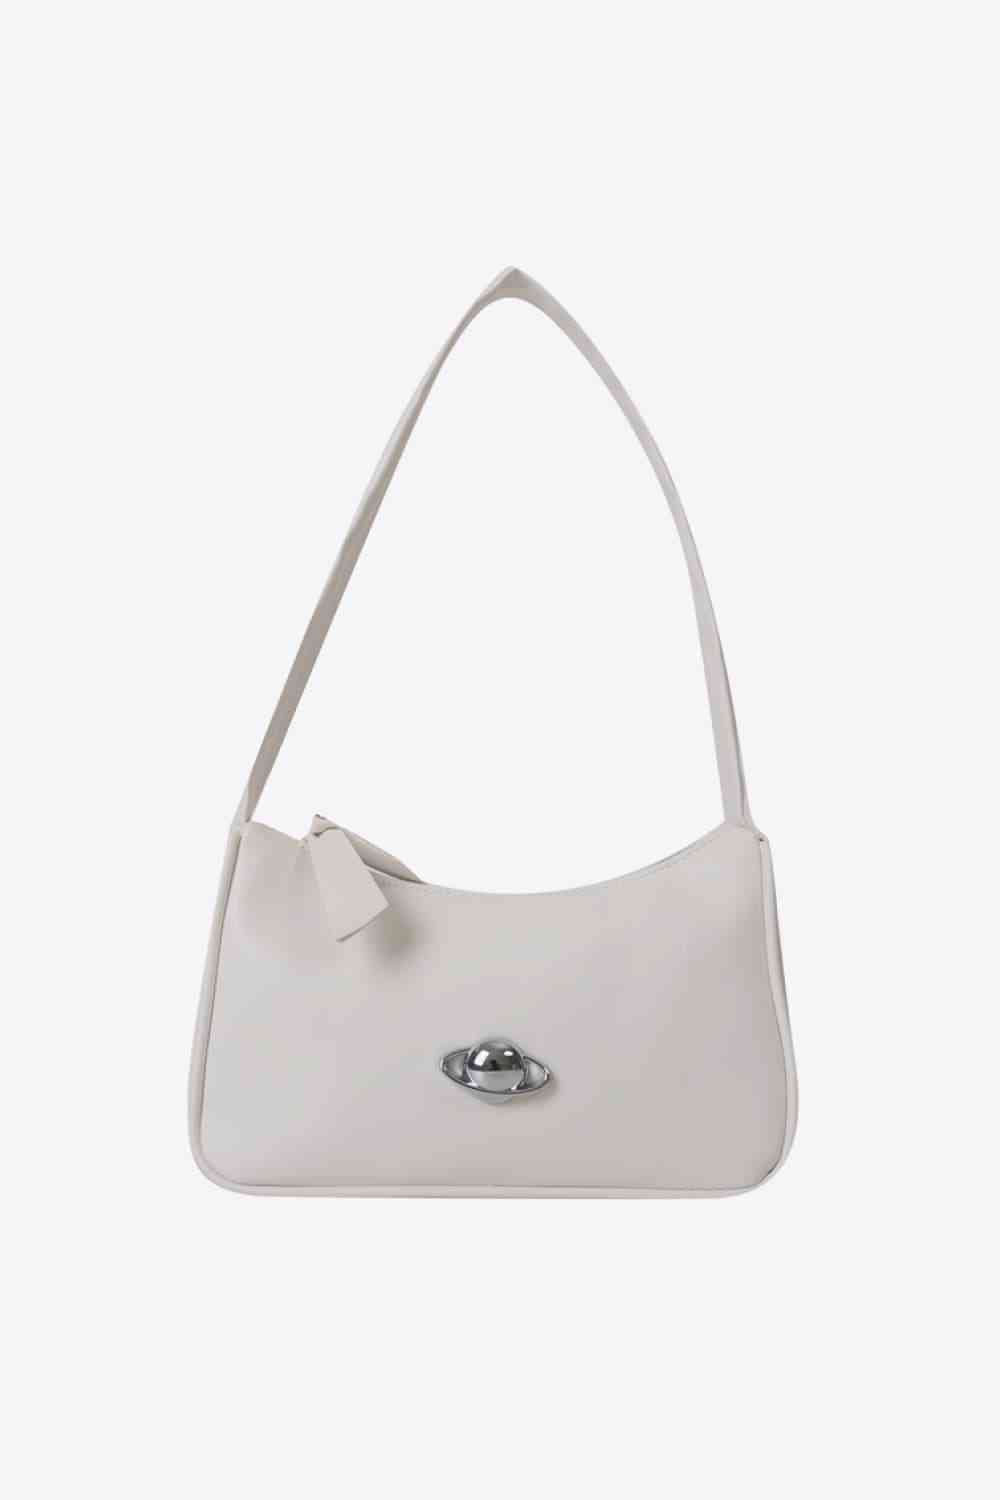 PU Leather Shoulder Bag - White / One Size - All Products - Handbags - 17 - 2024